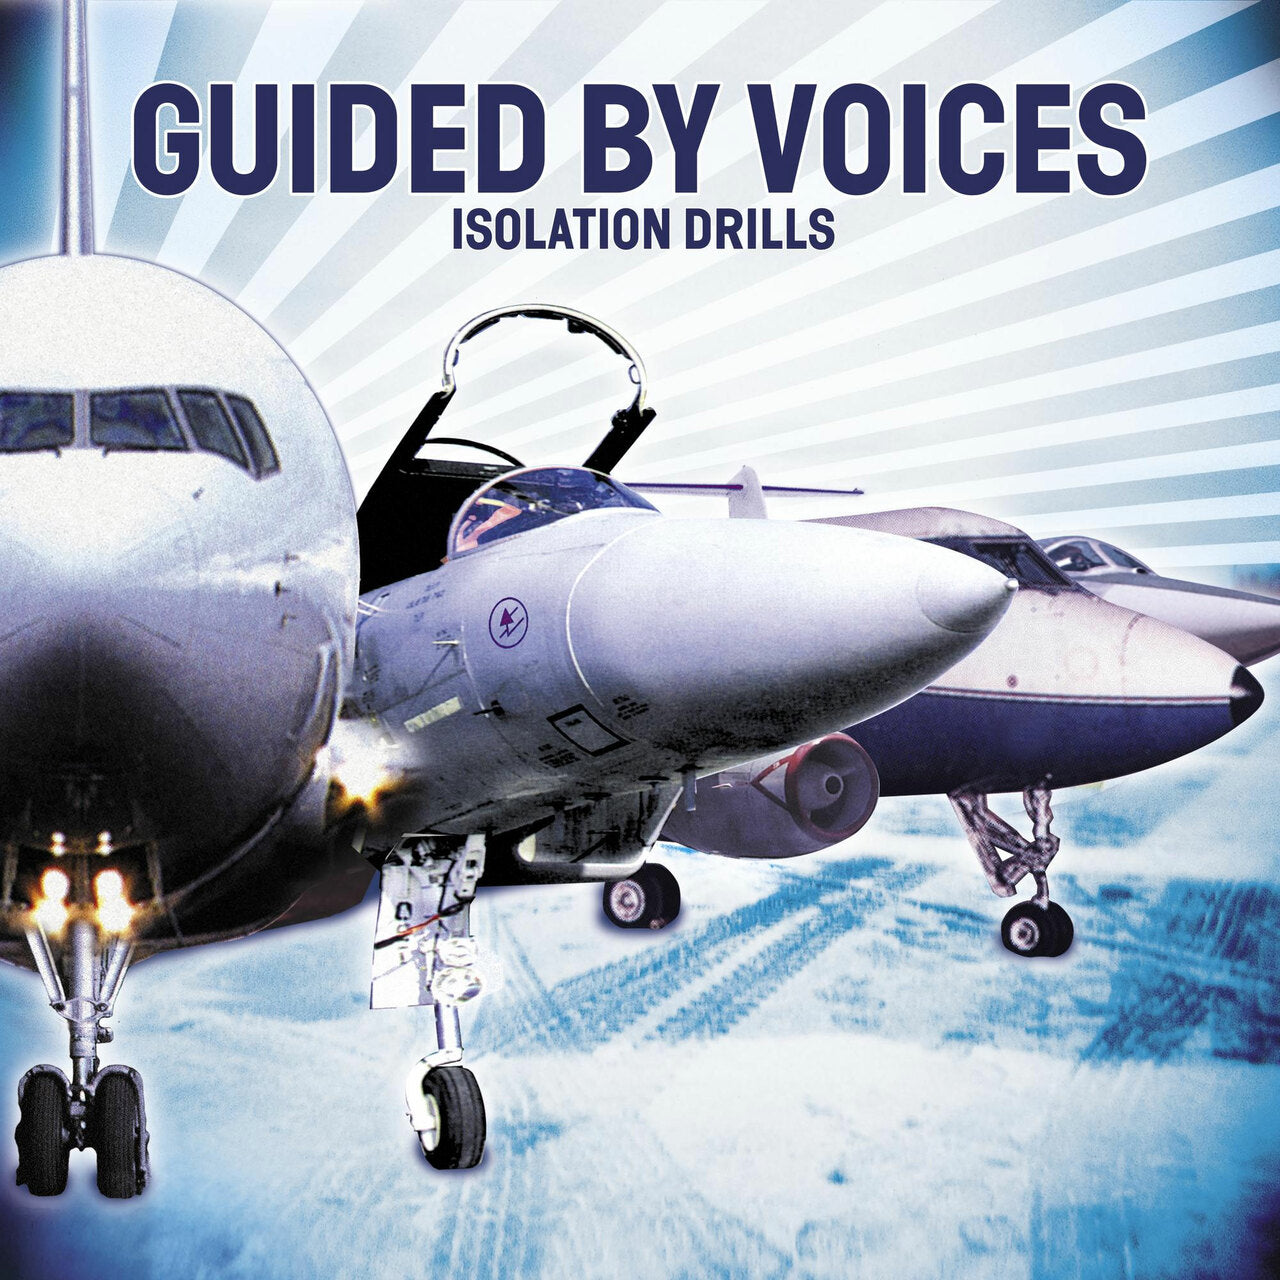 GUIDED BY VOICES - Isolation Drills (2021 Reissue) - 2LP - Gatefold Vinyl